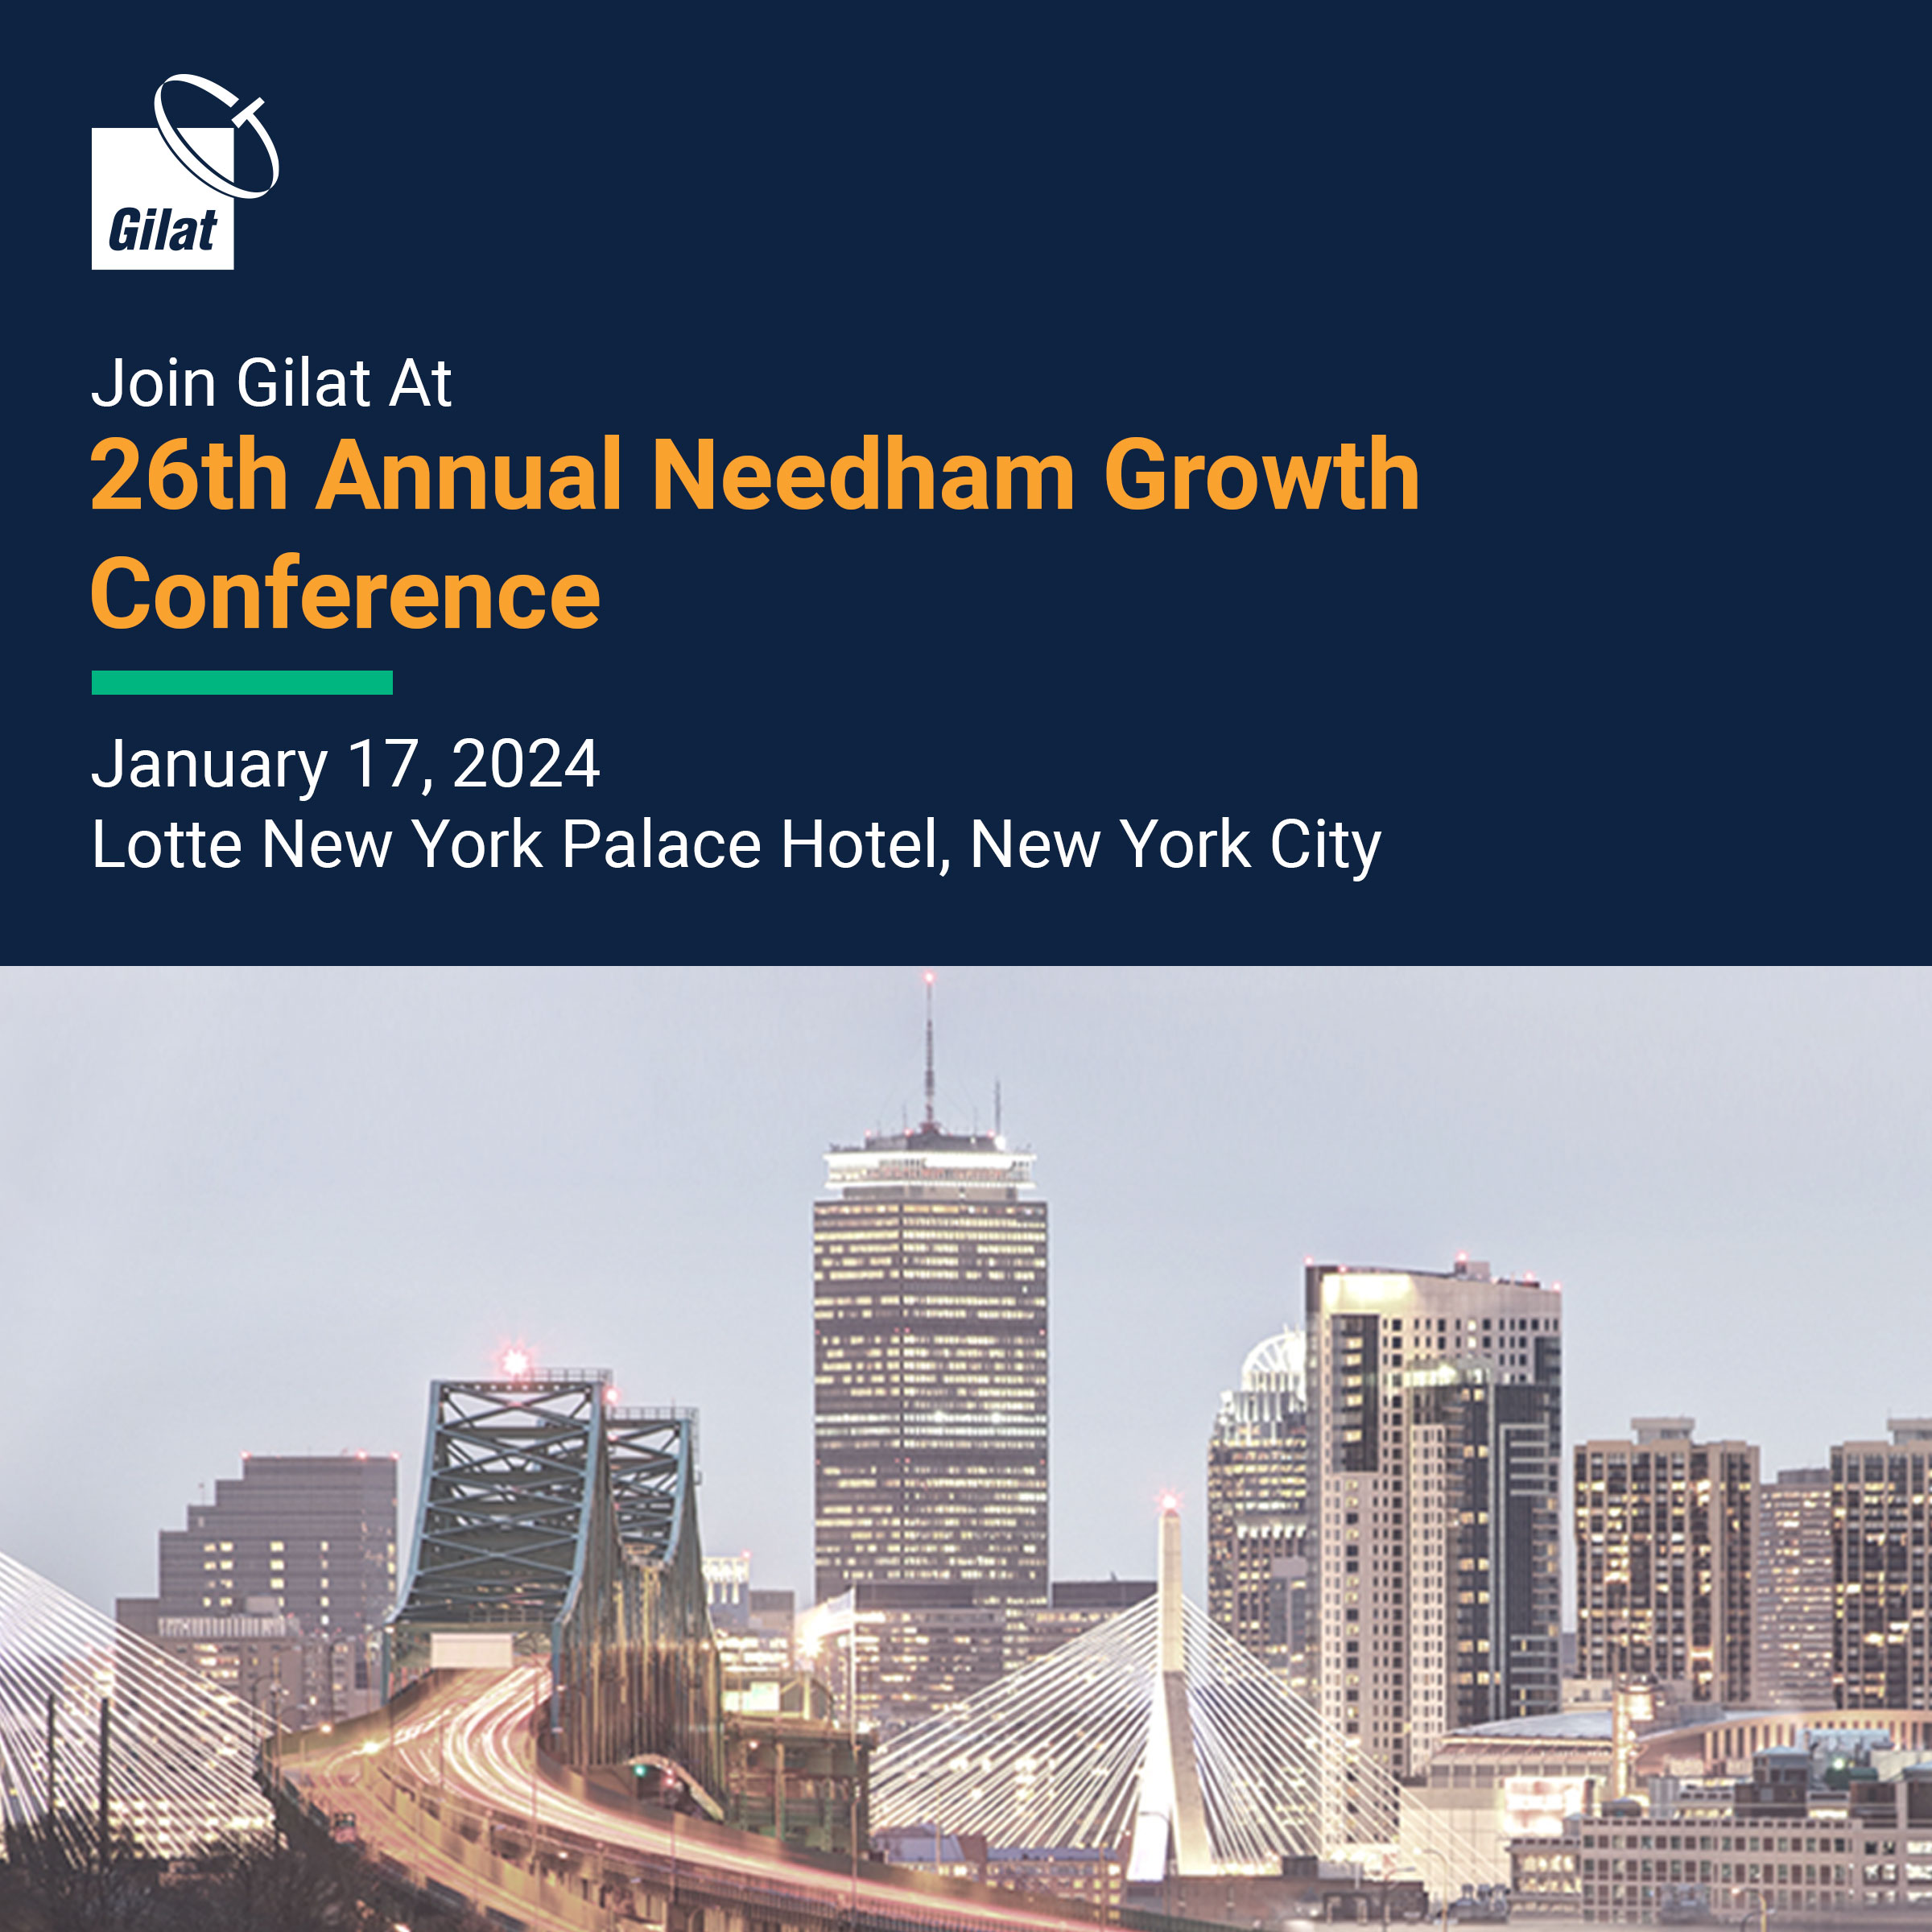 Gilat to Participate in the 26th Annual Needham Growth Conference on January 17, 2024